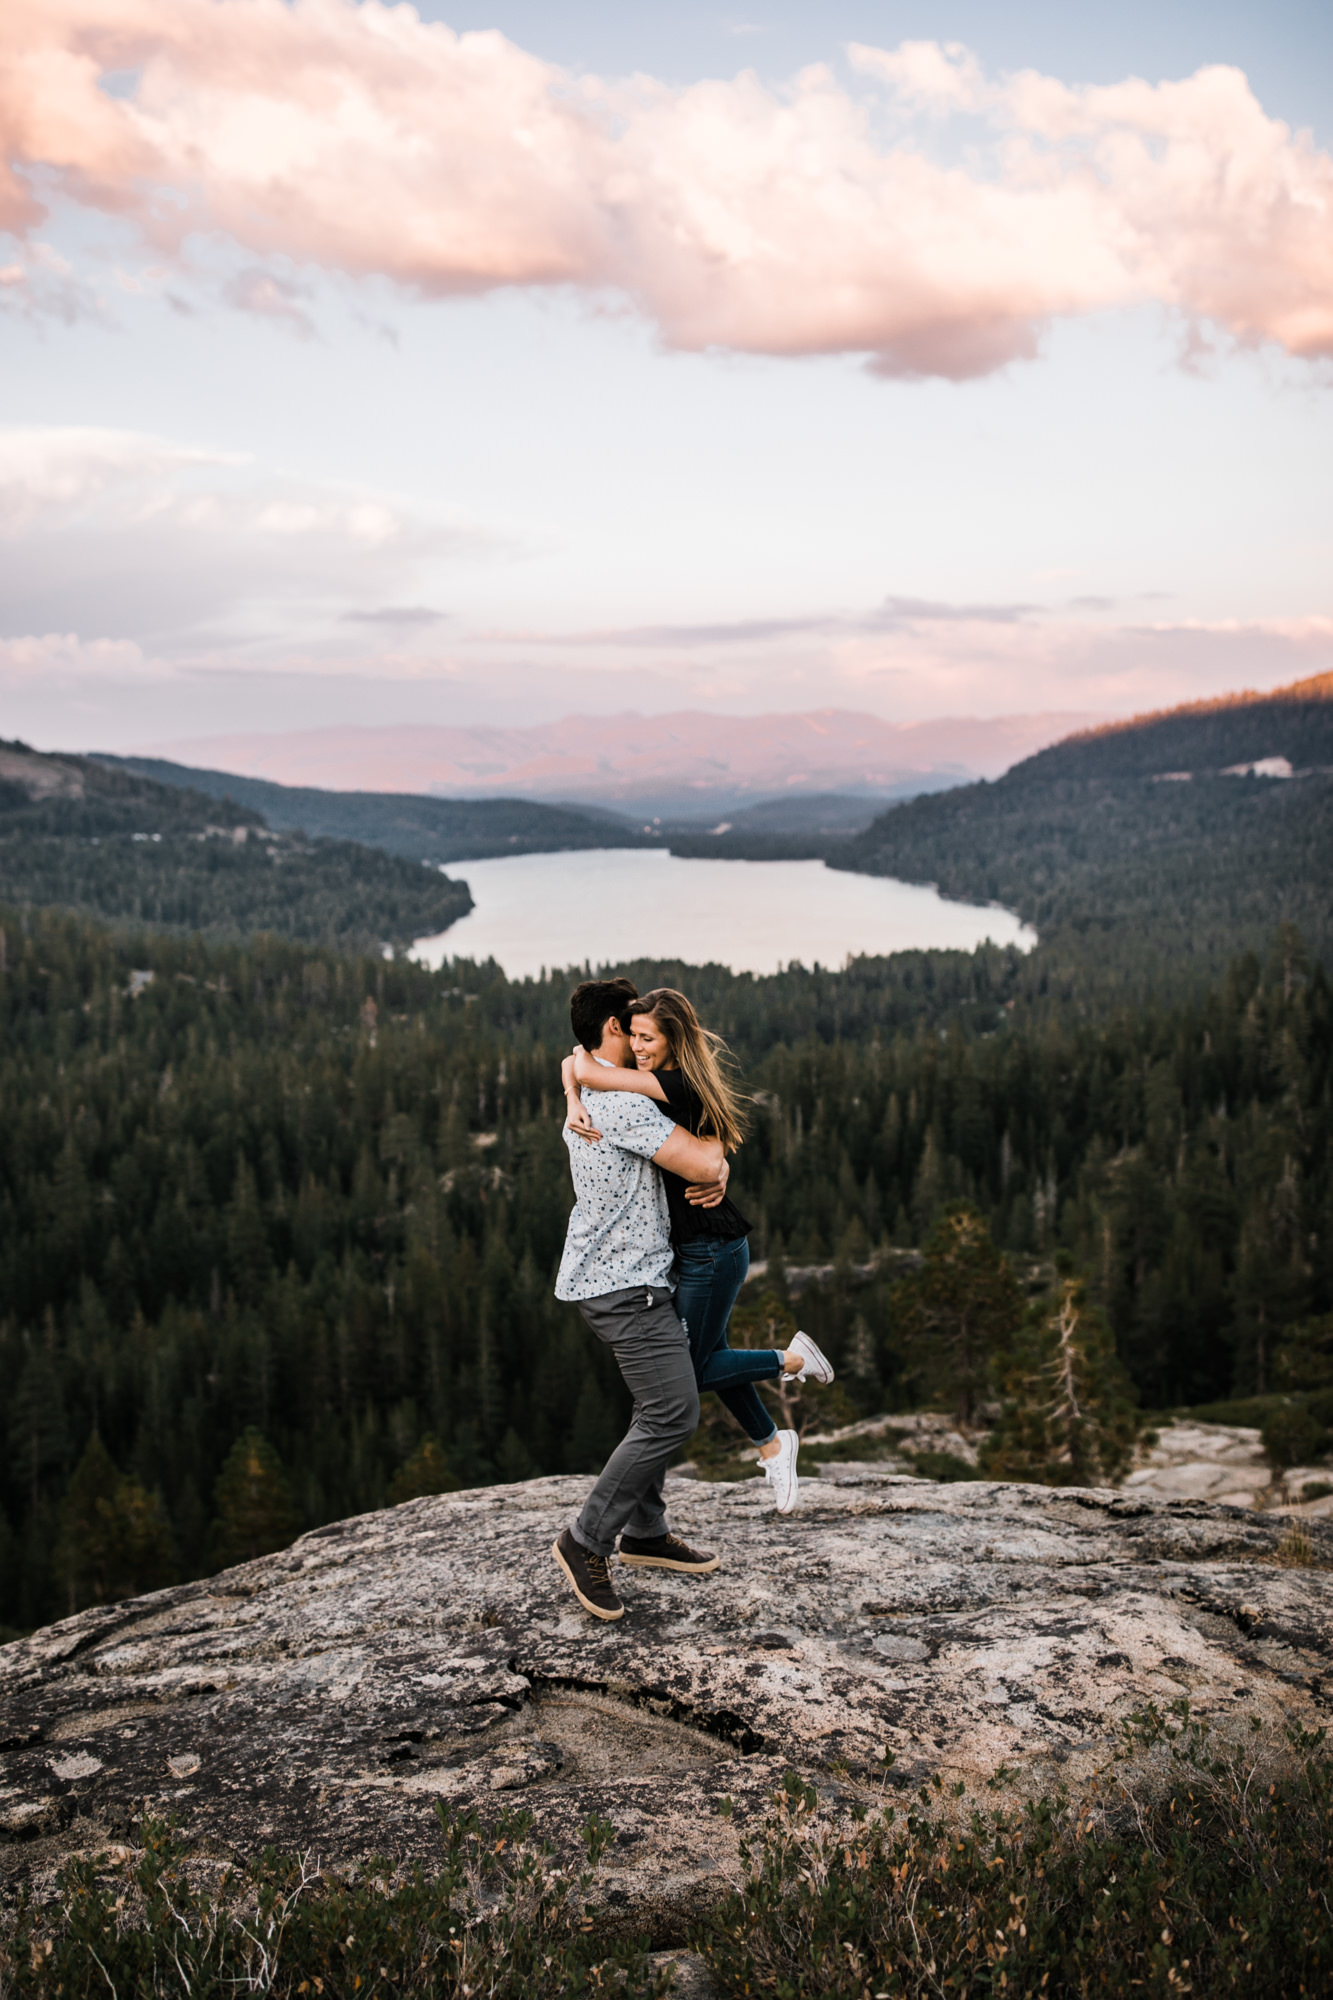 adventure engagement session in truckee | destination engagement photo inspiration | utah adventure elopement photographers | the hearnes adventure photography | www.thehearnes.com